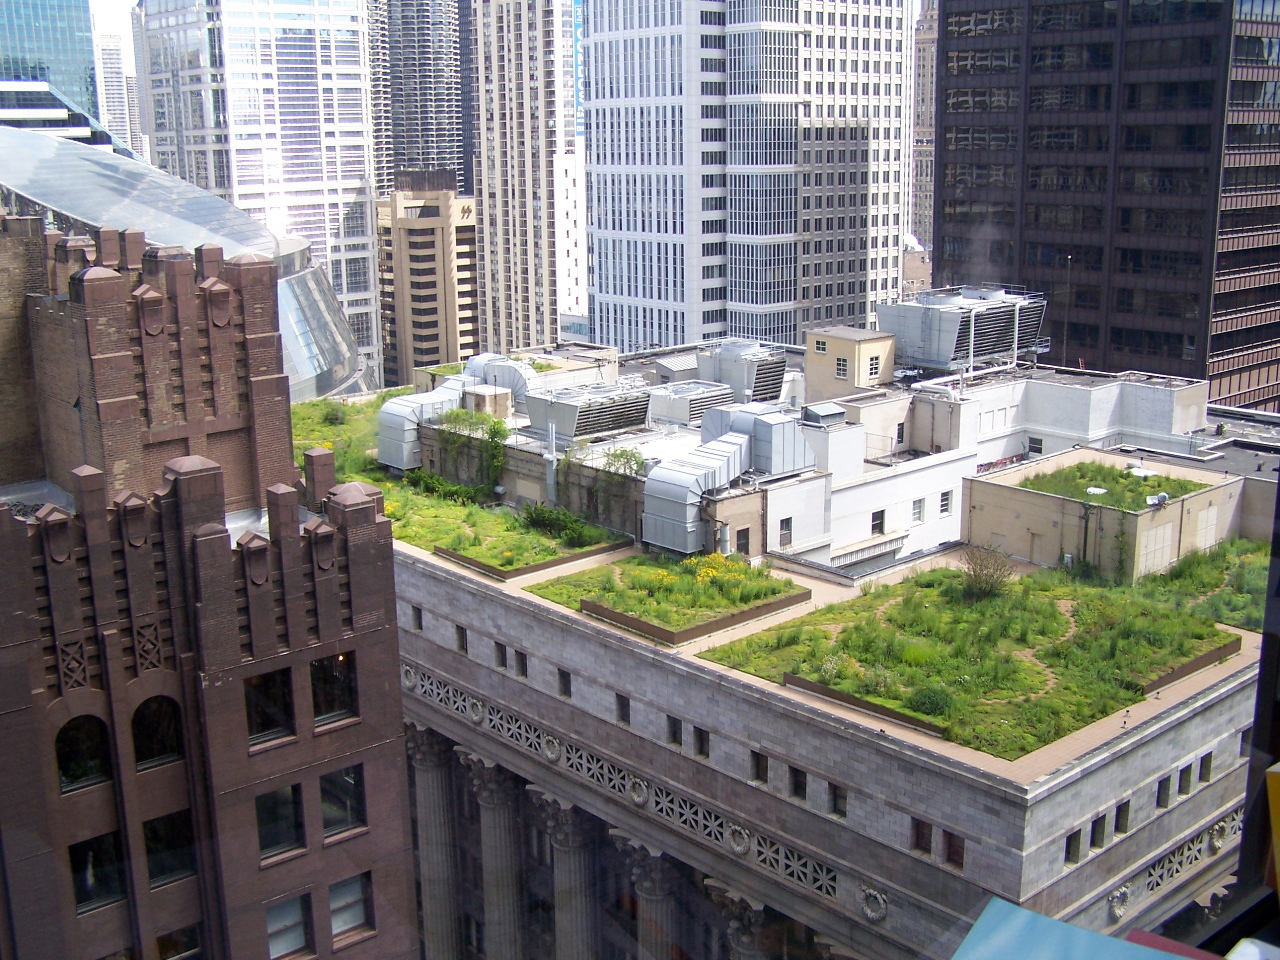 Green roof installation on Chicago City Hall. Green roofs collect and retain storm runoff keeping it from entering combined sewer systems.